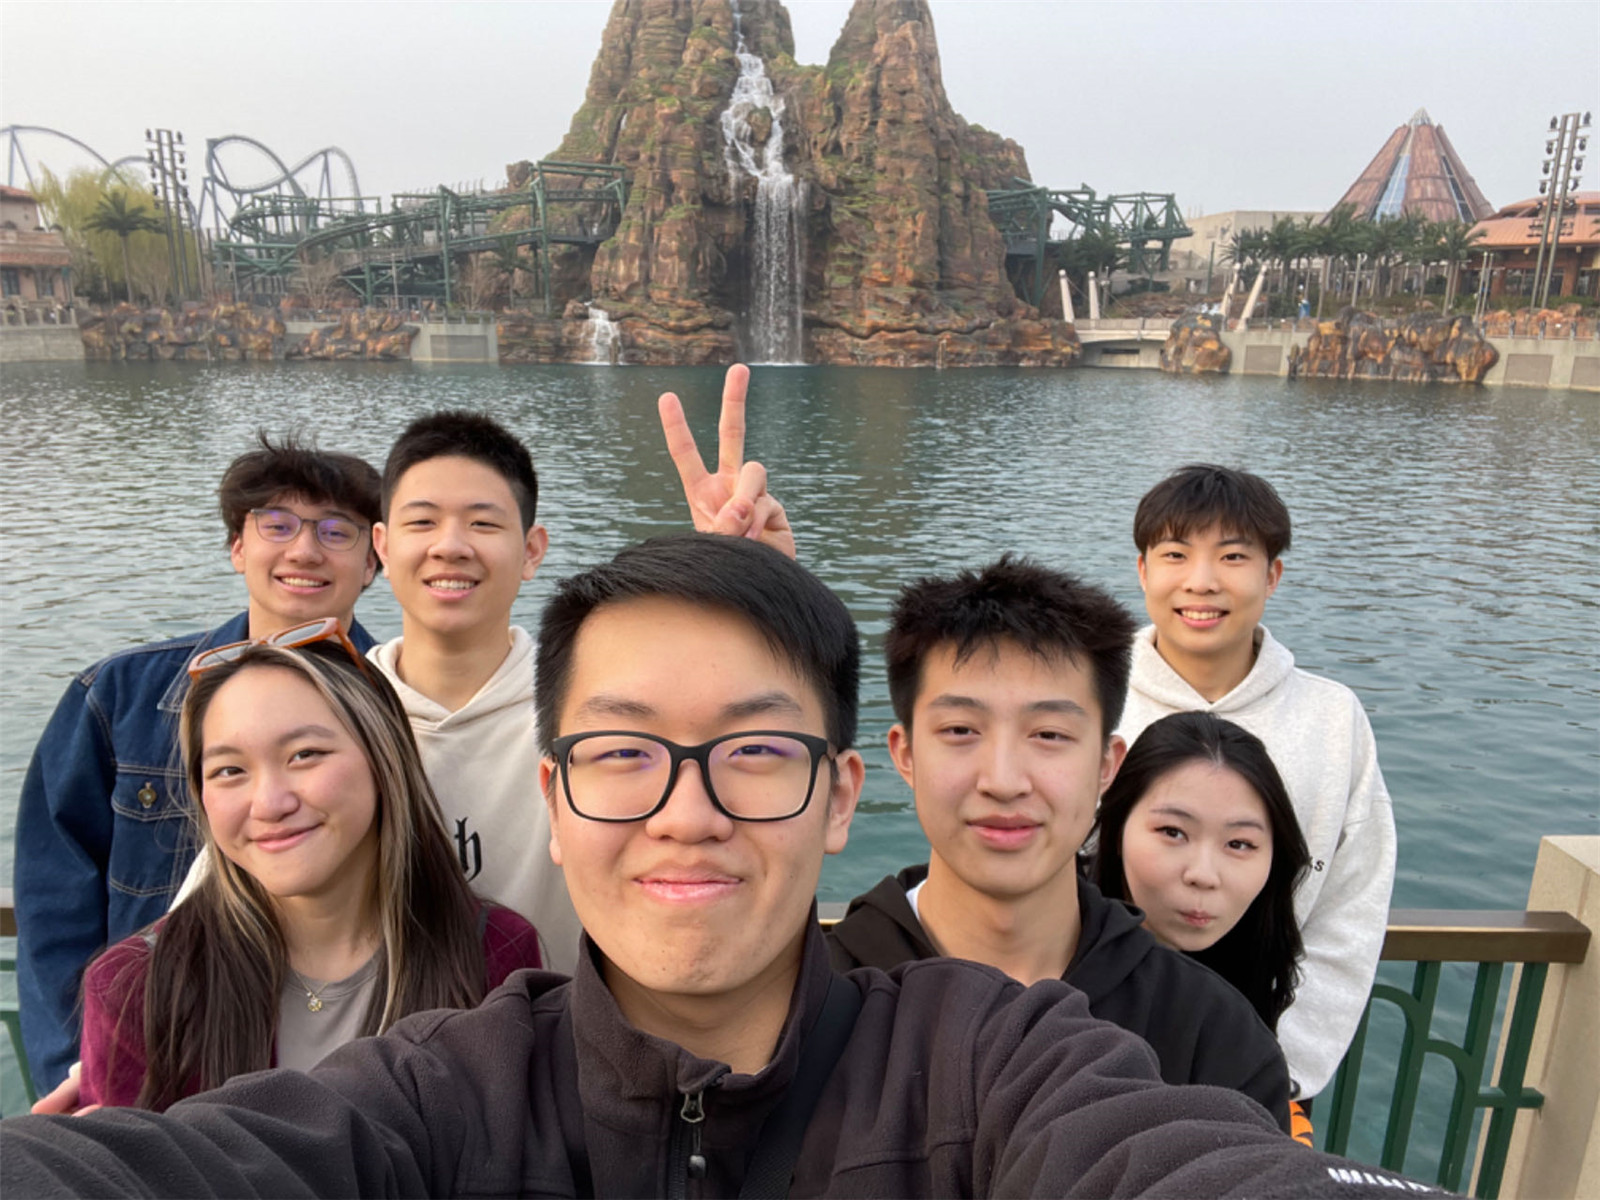 Brian and his friends go to Universal Studios Beijing